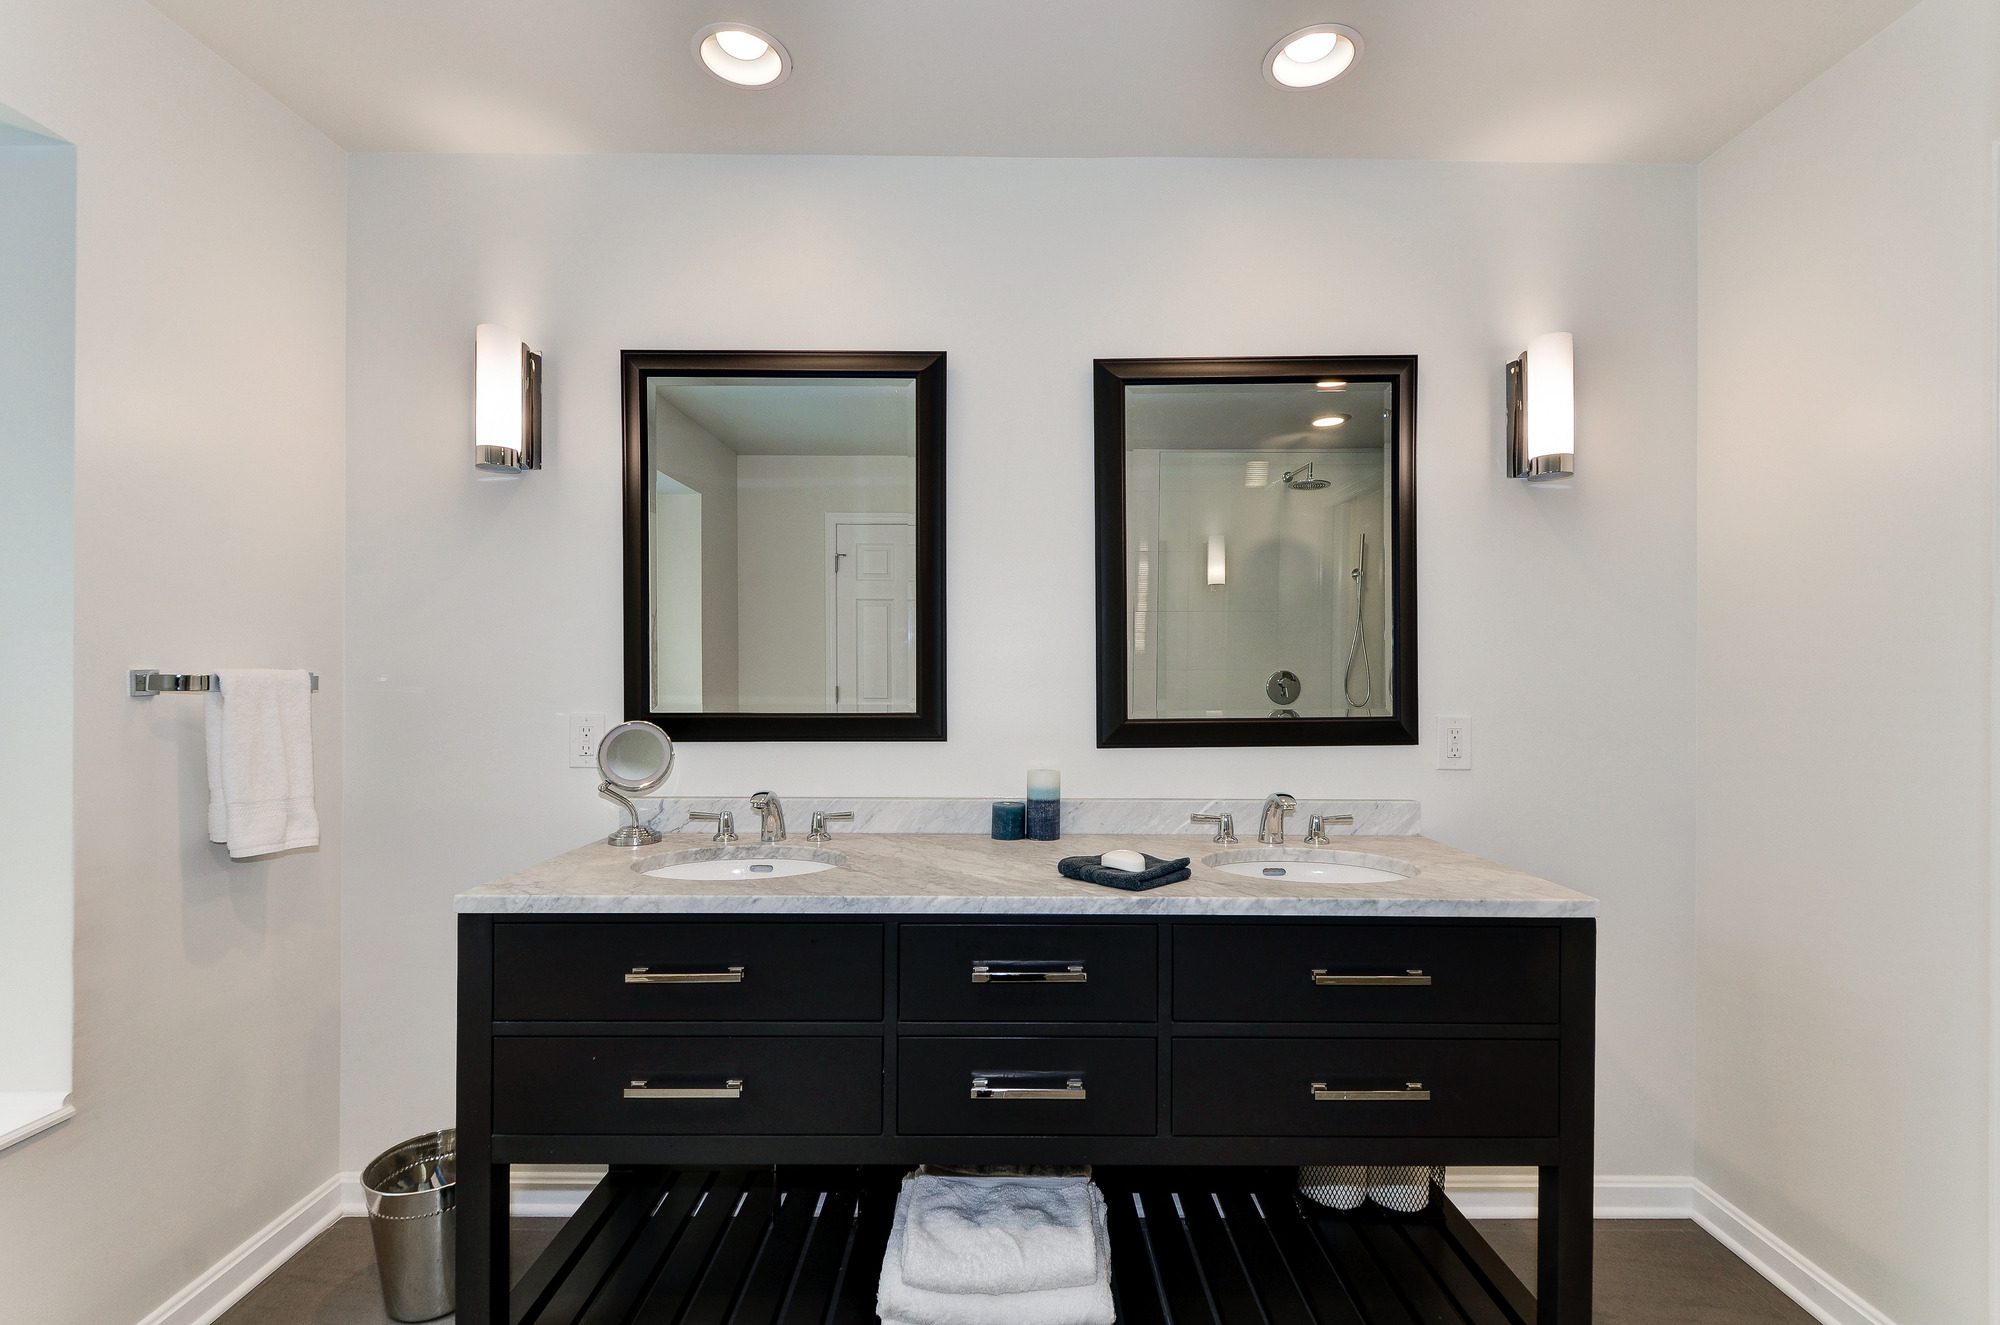 What to Look For When Choosing a Double Sink in Your Master Bath